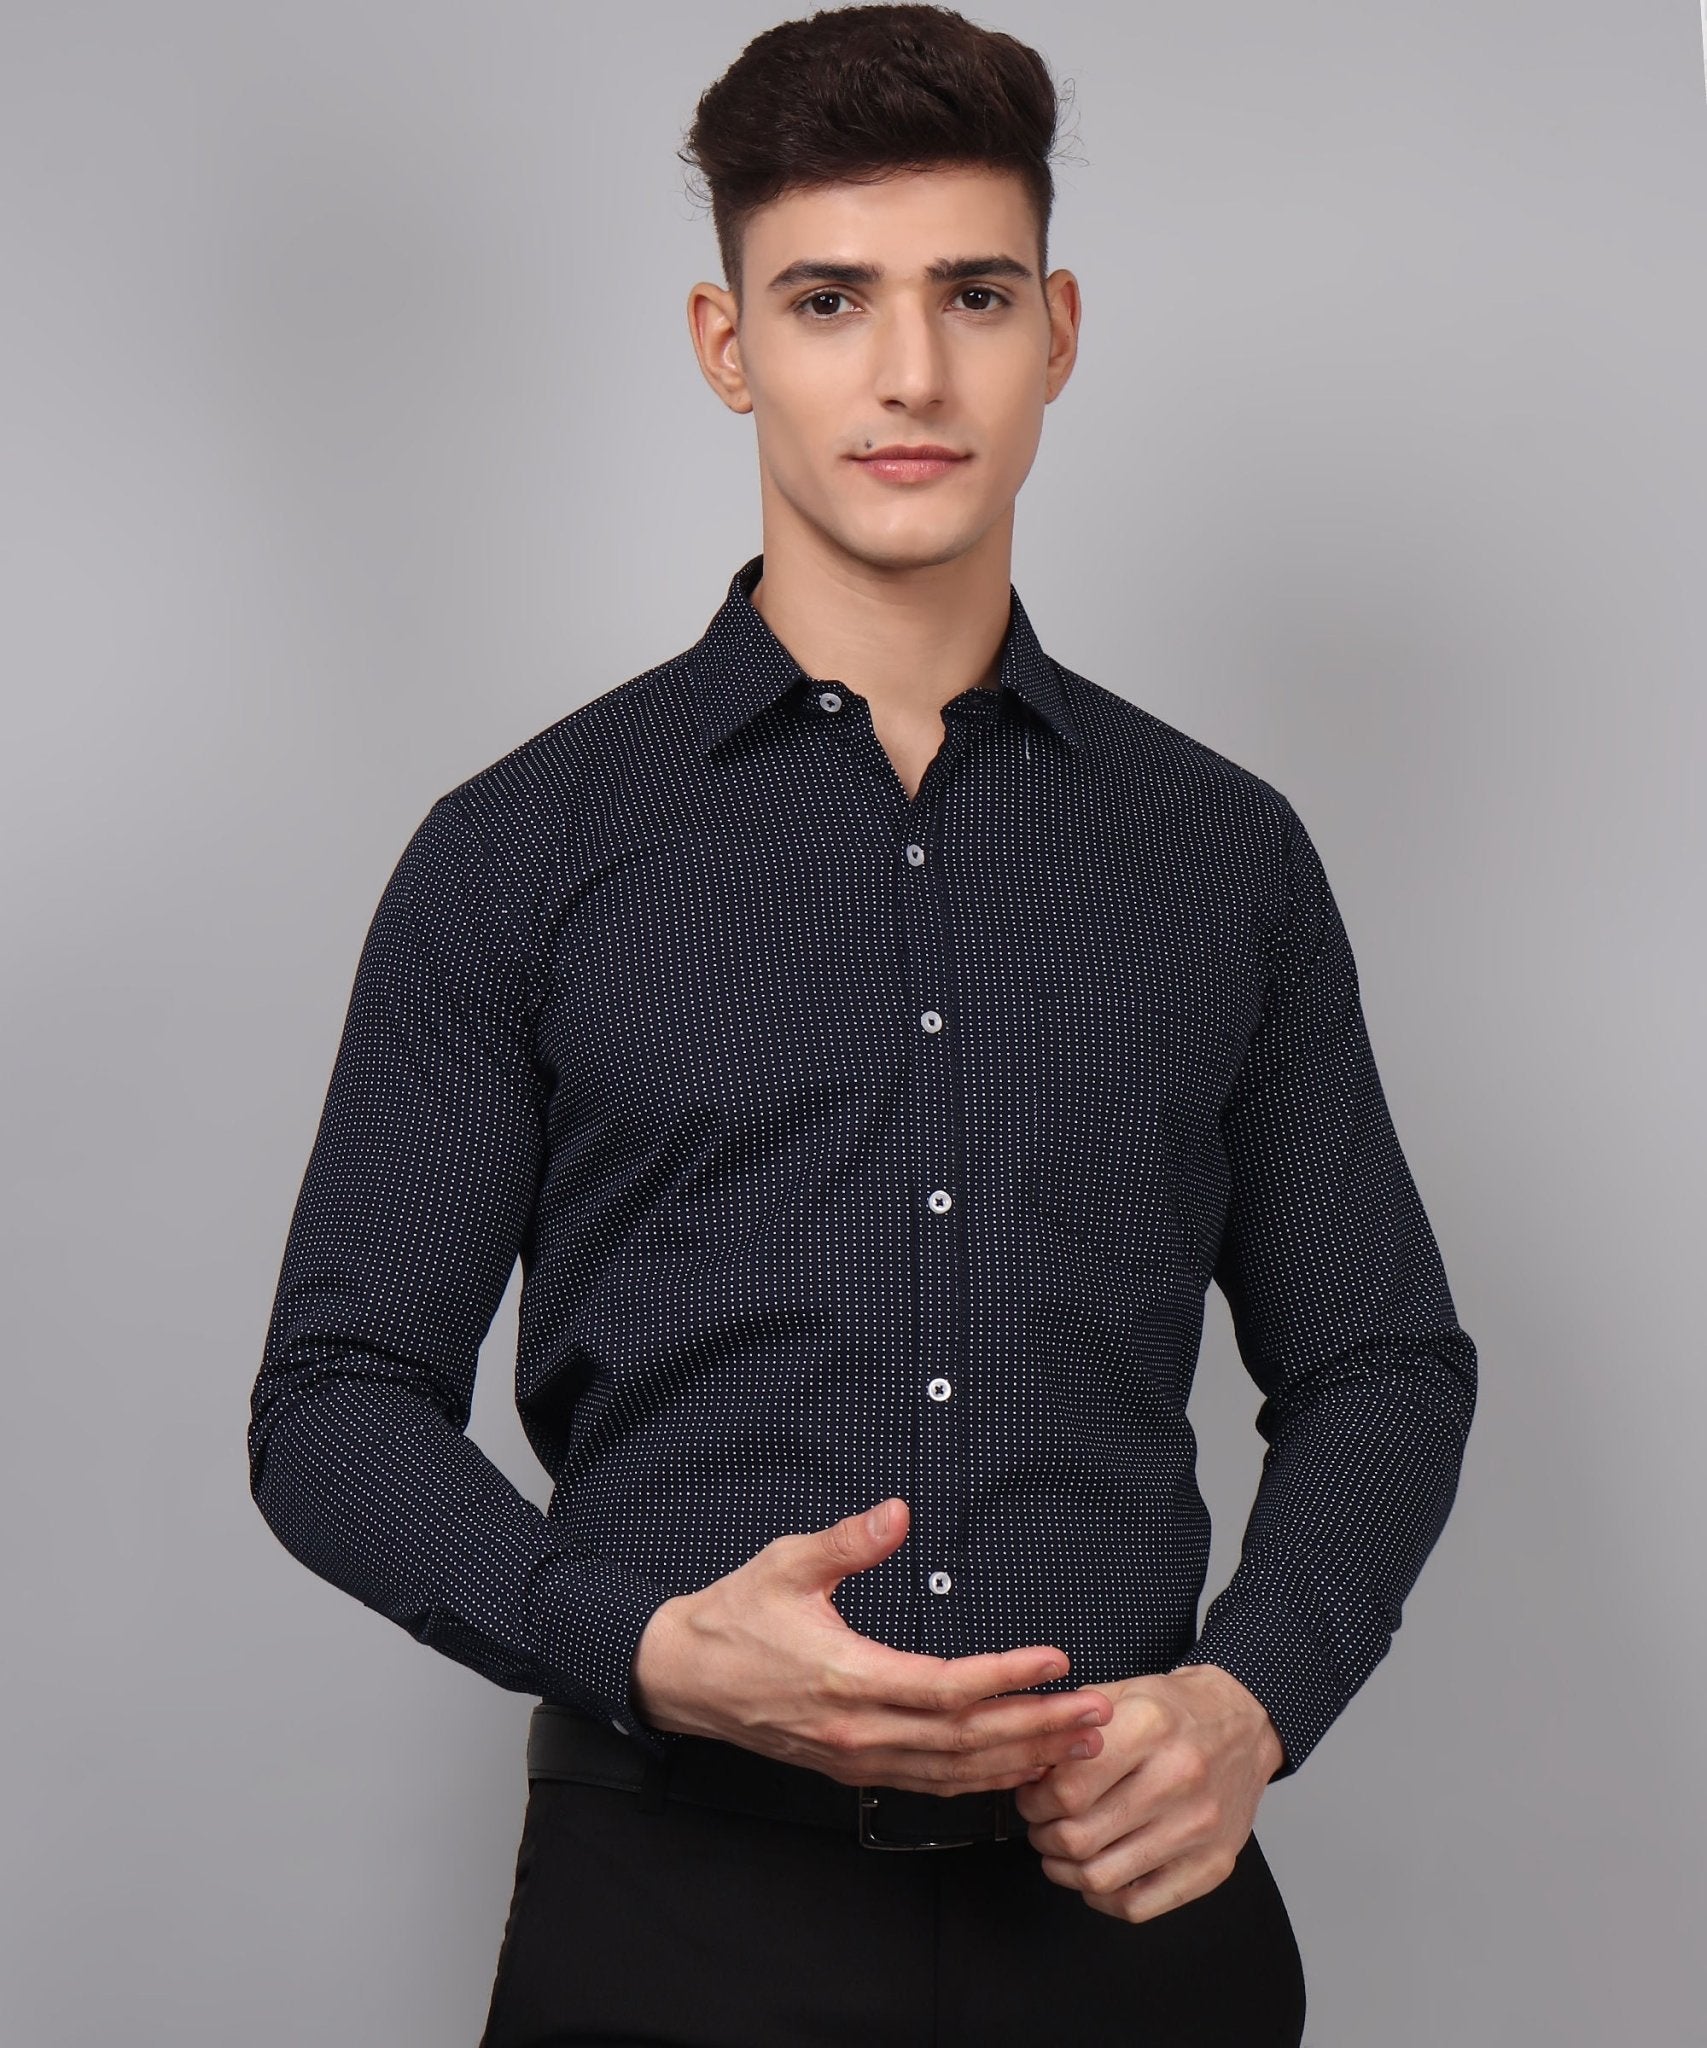 TryBuy Premium Pure Cotton Dot Printed Casual/Formal Navy Blue Shirt for Men - TryBuy® USA🇺🇸